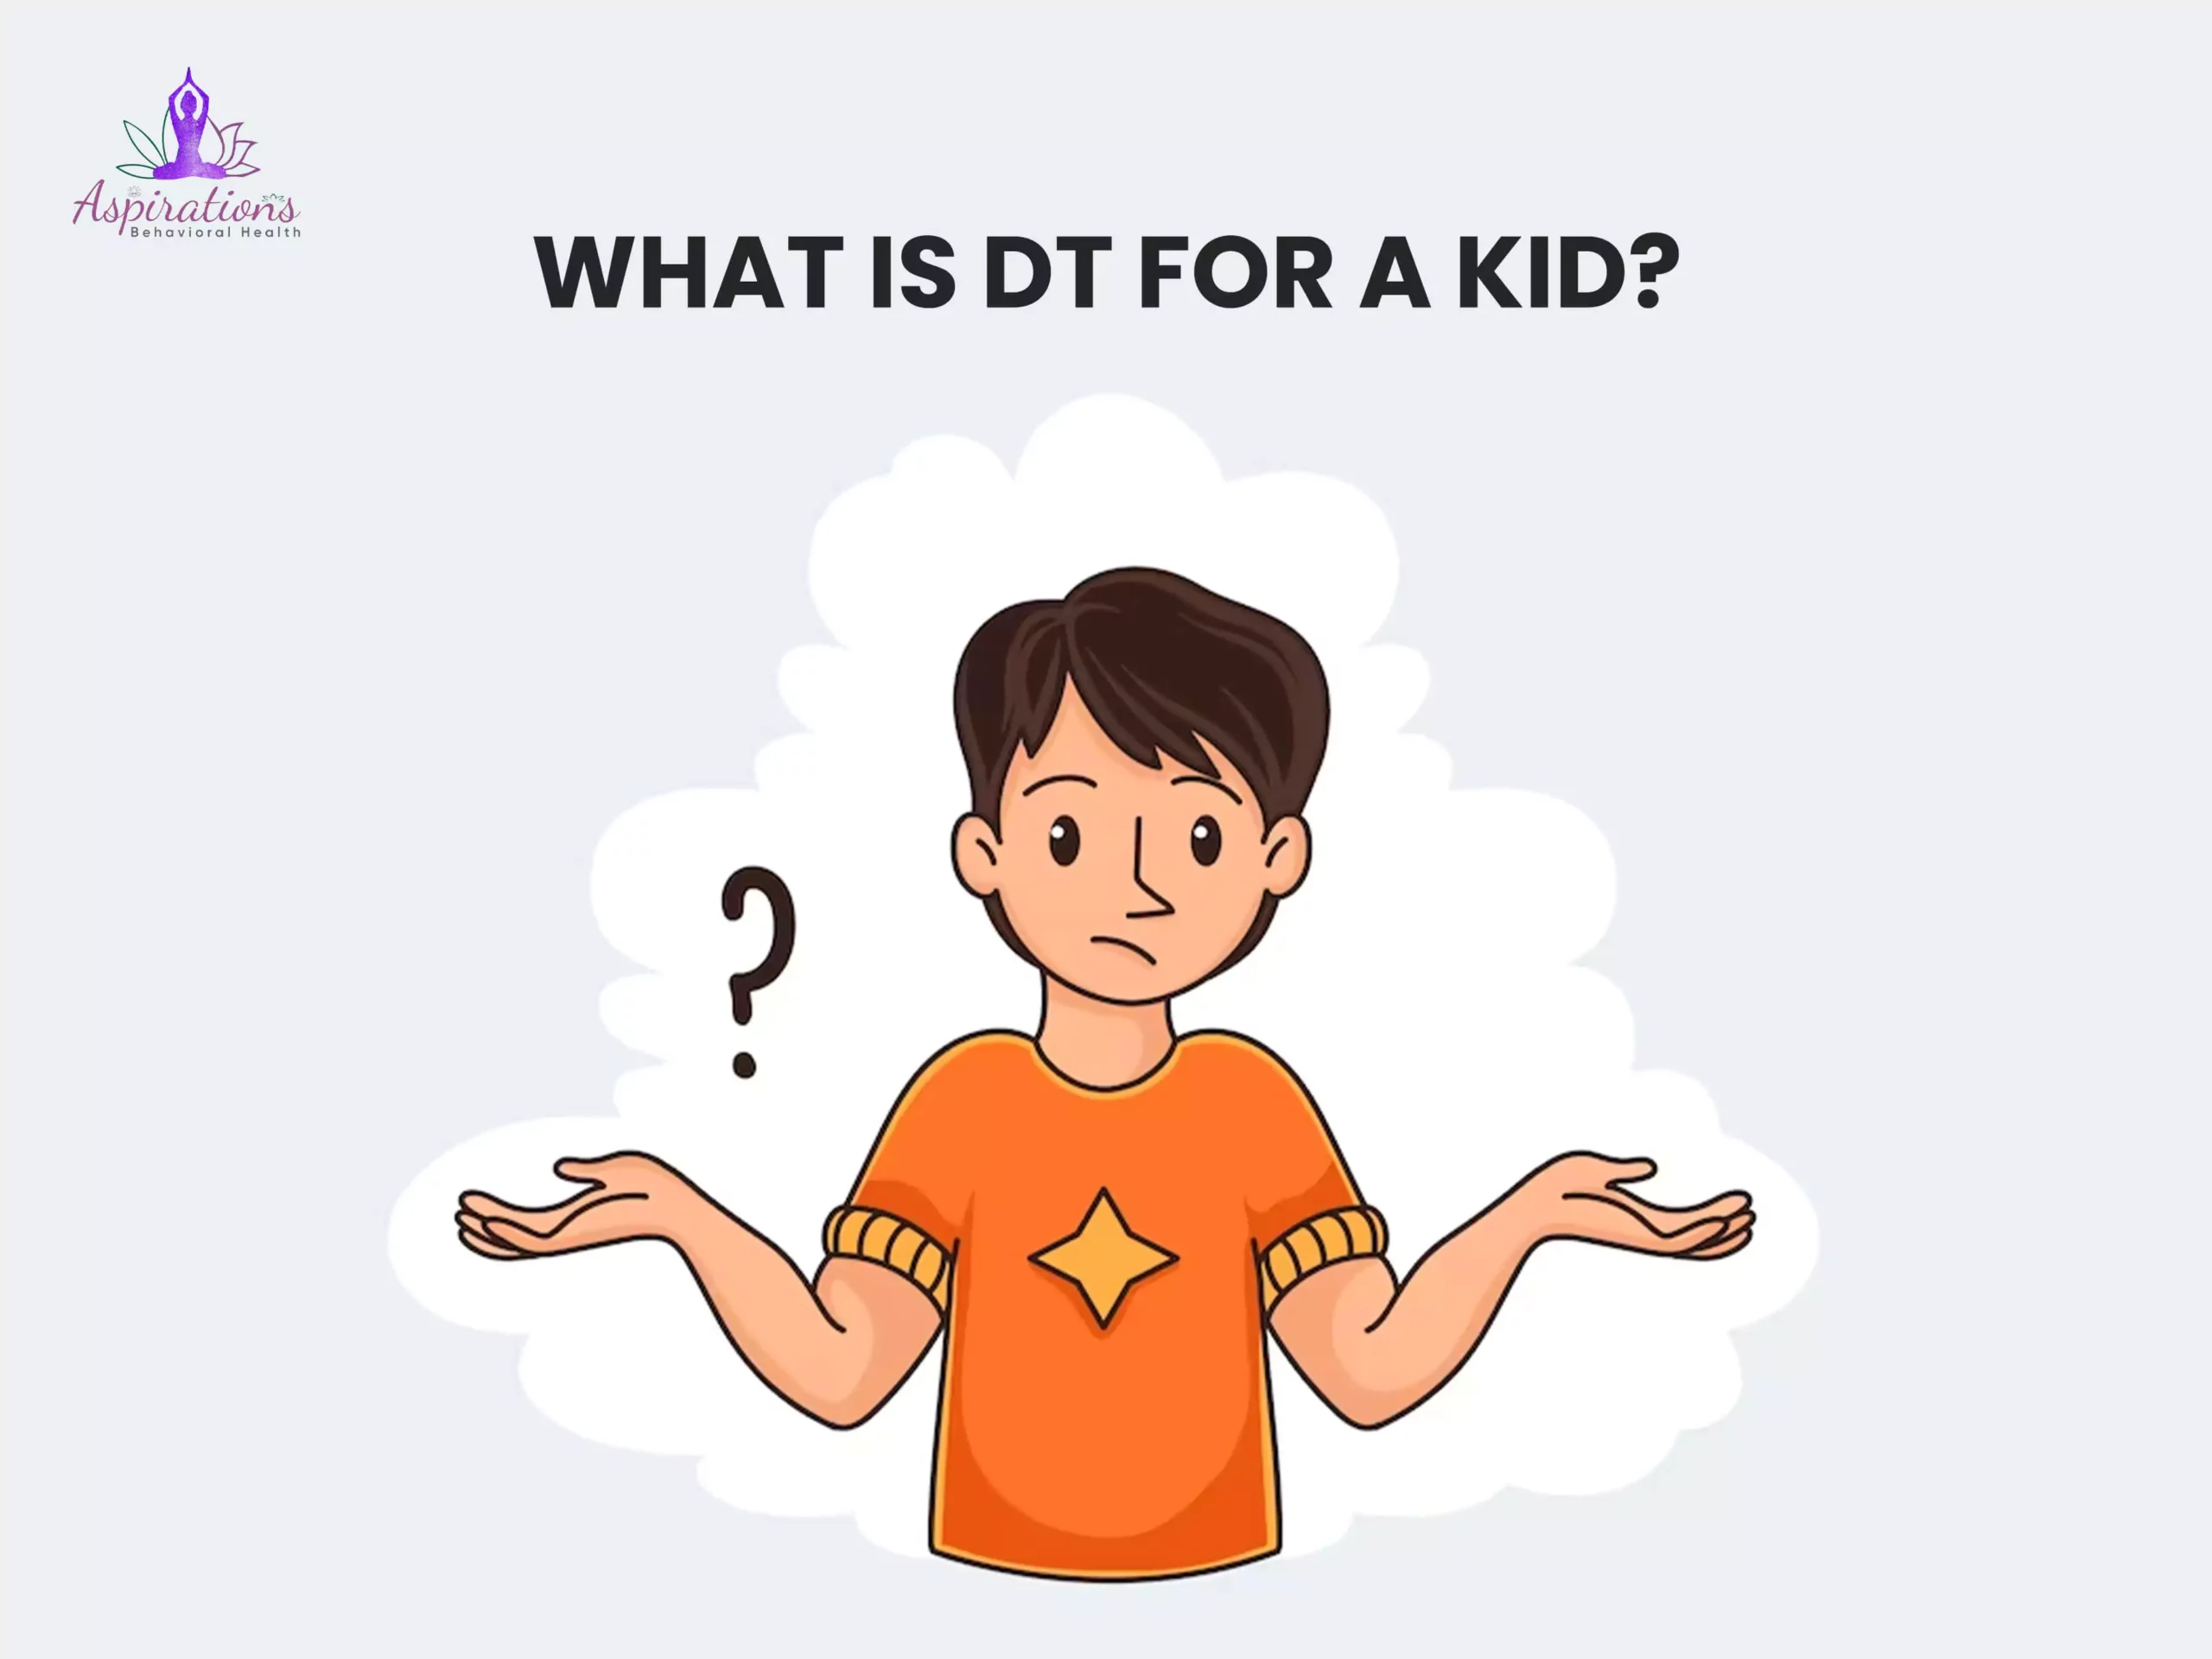 What Is DT For A Kid?